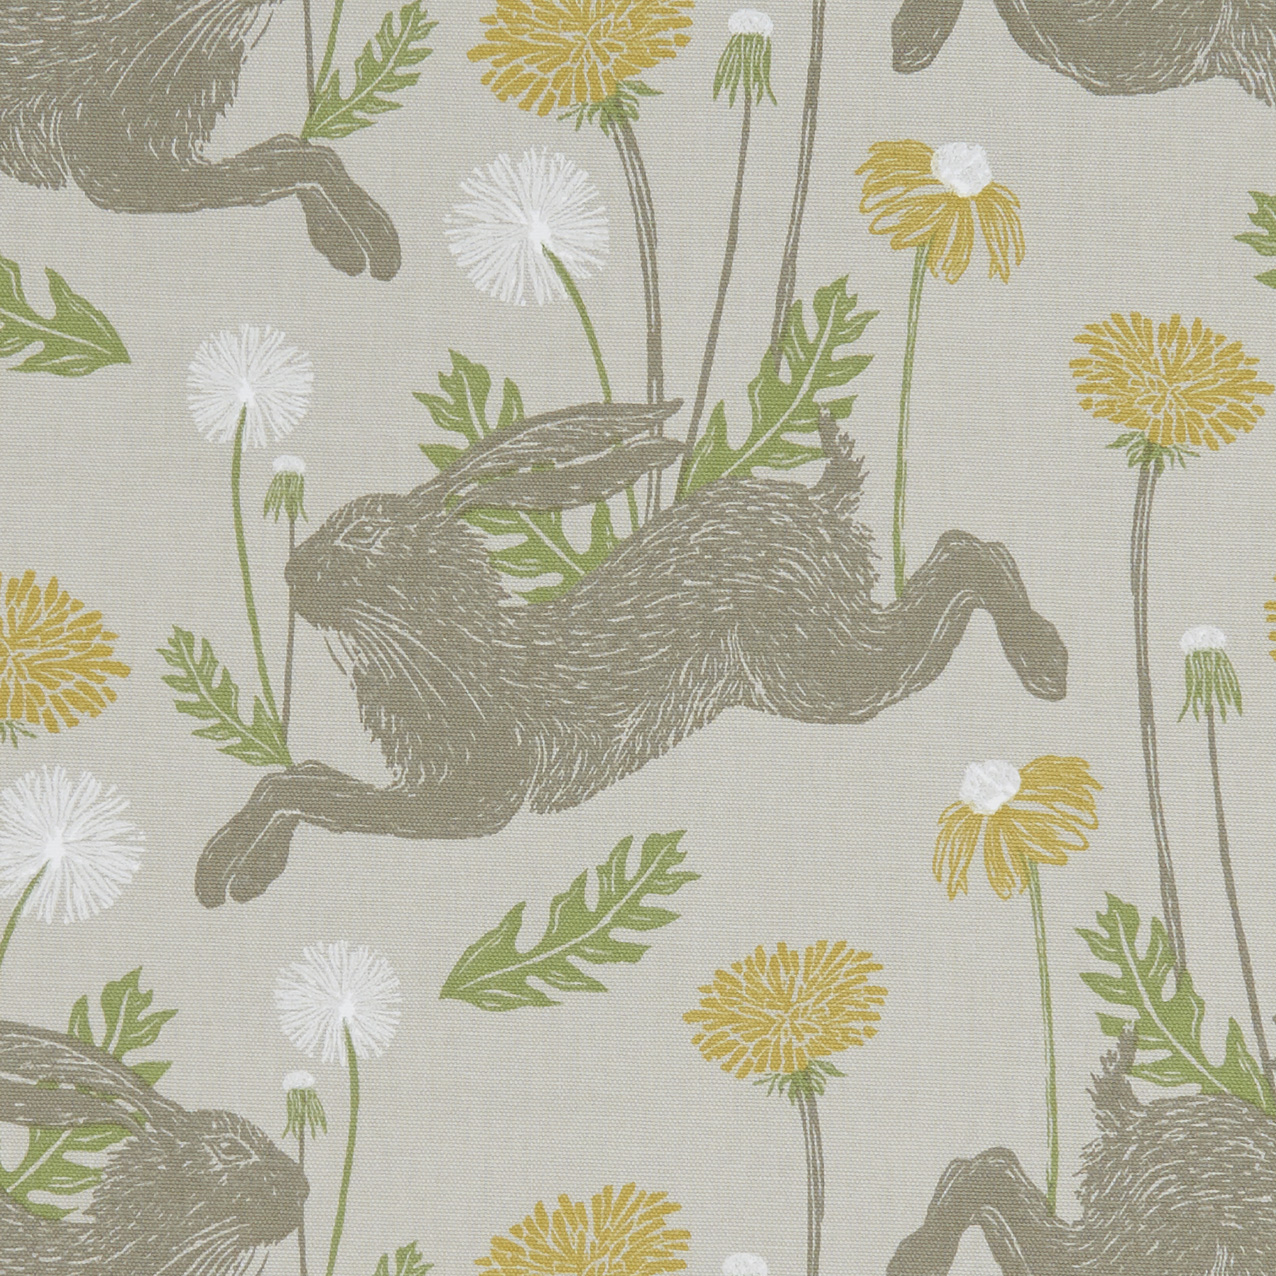 March Hare Linen Fabric by Studio G